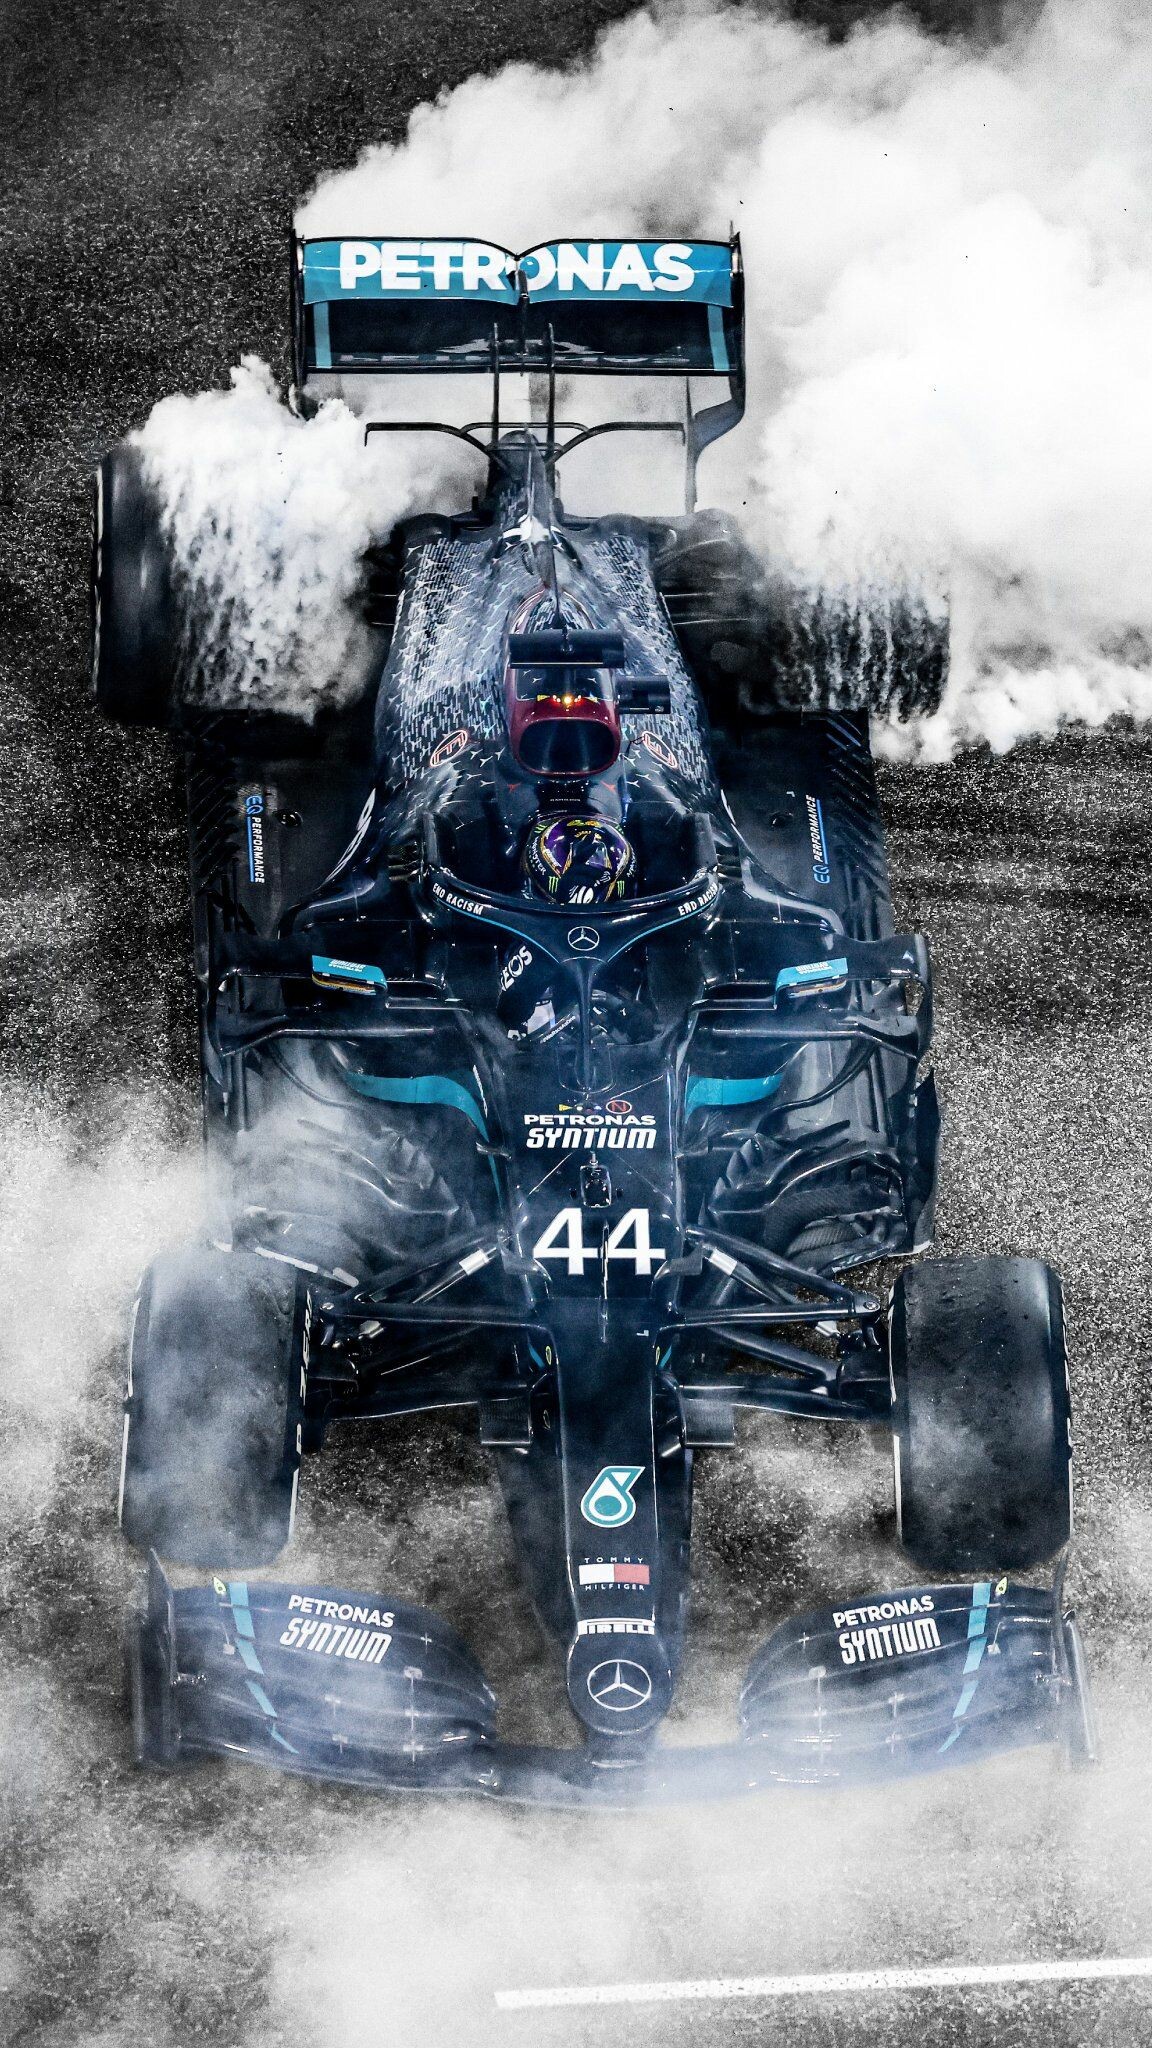 Lewis Hamilton: Signed a contract with Mercedes, replacing the retiring Michael Schumacher, as Nico Rosberg's teammate, 2013. 1160x2050 HD Background.